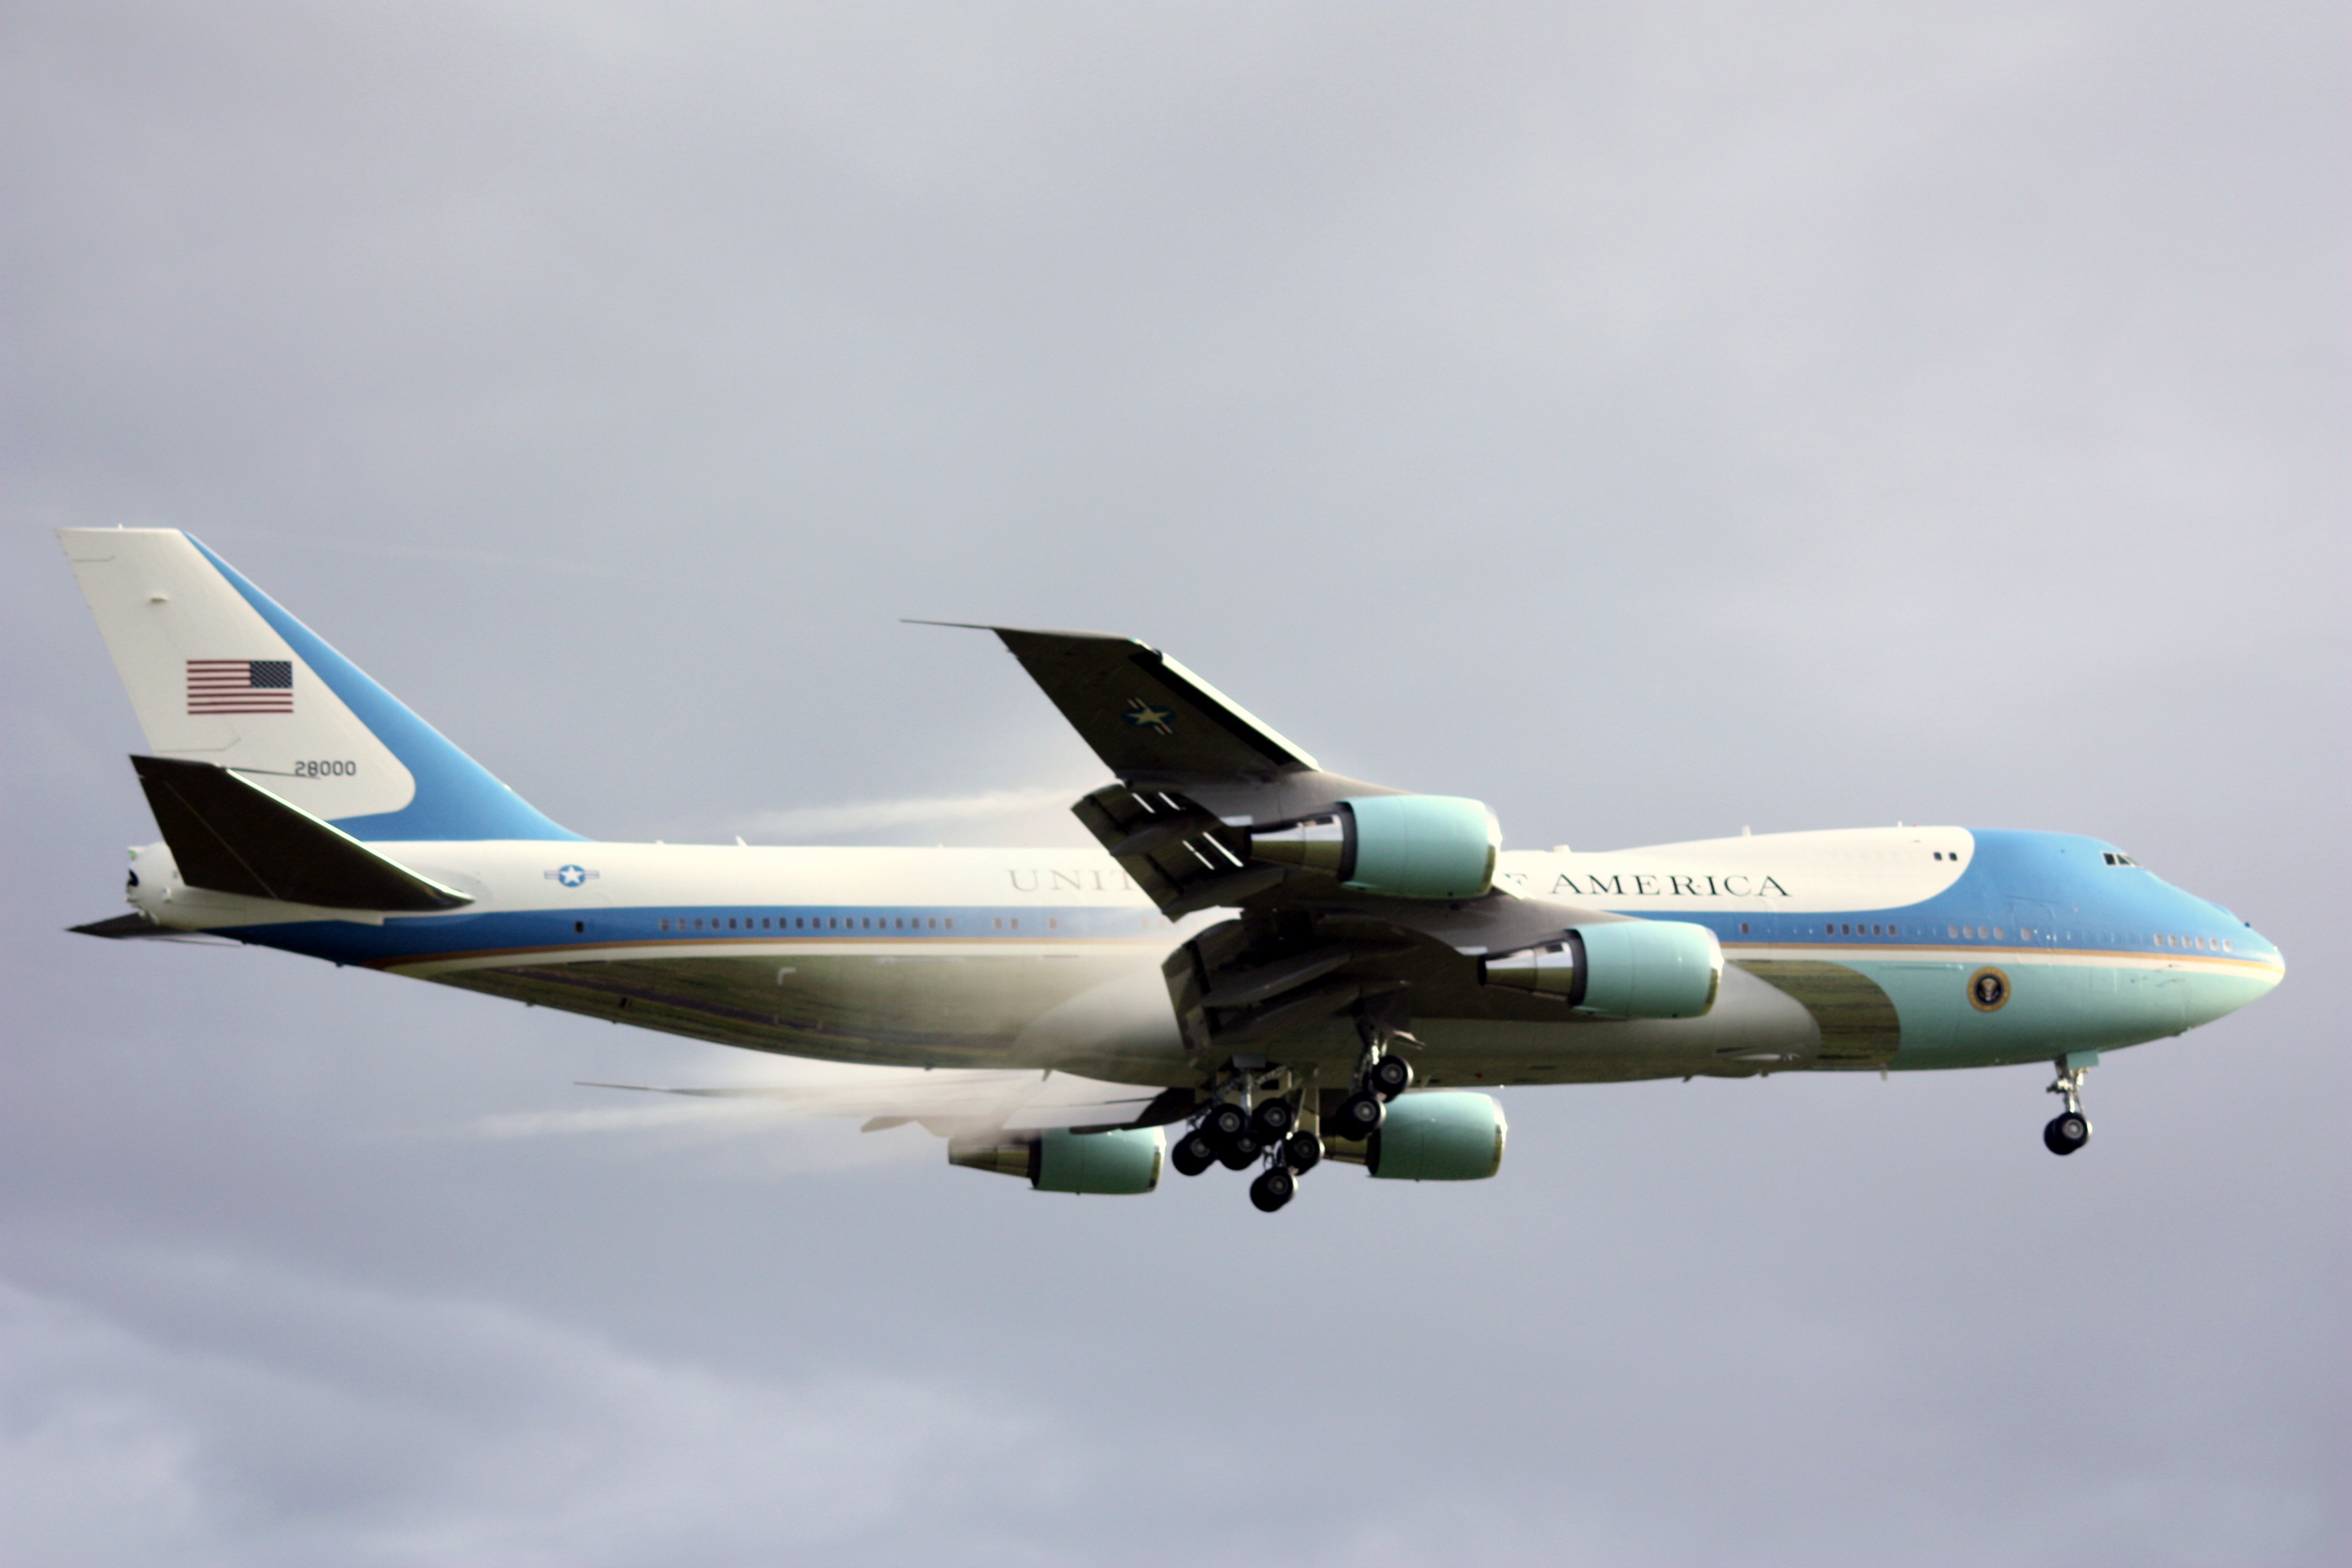 747 air force one aircrafts airliner airplane Boeing plane